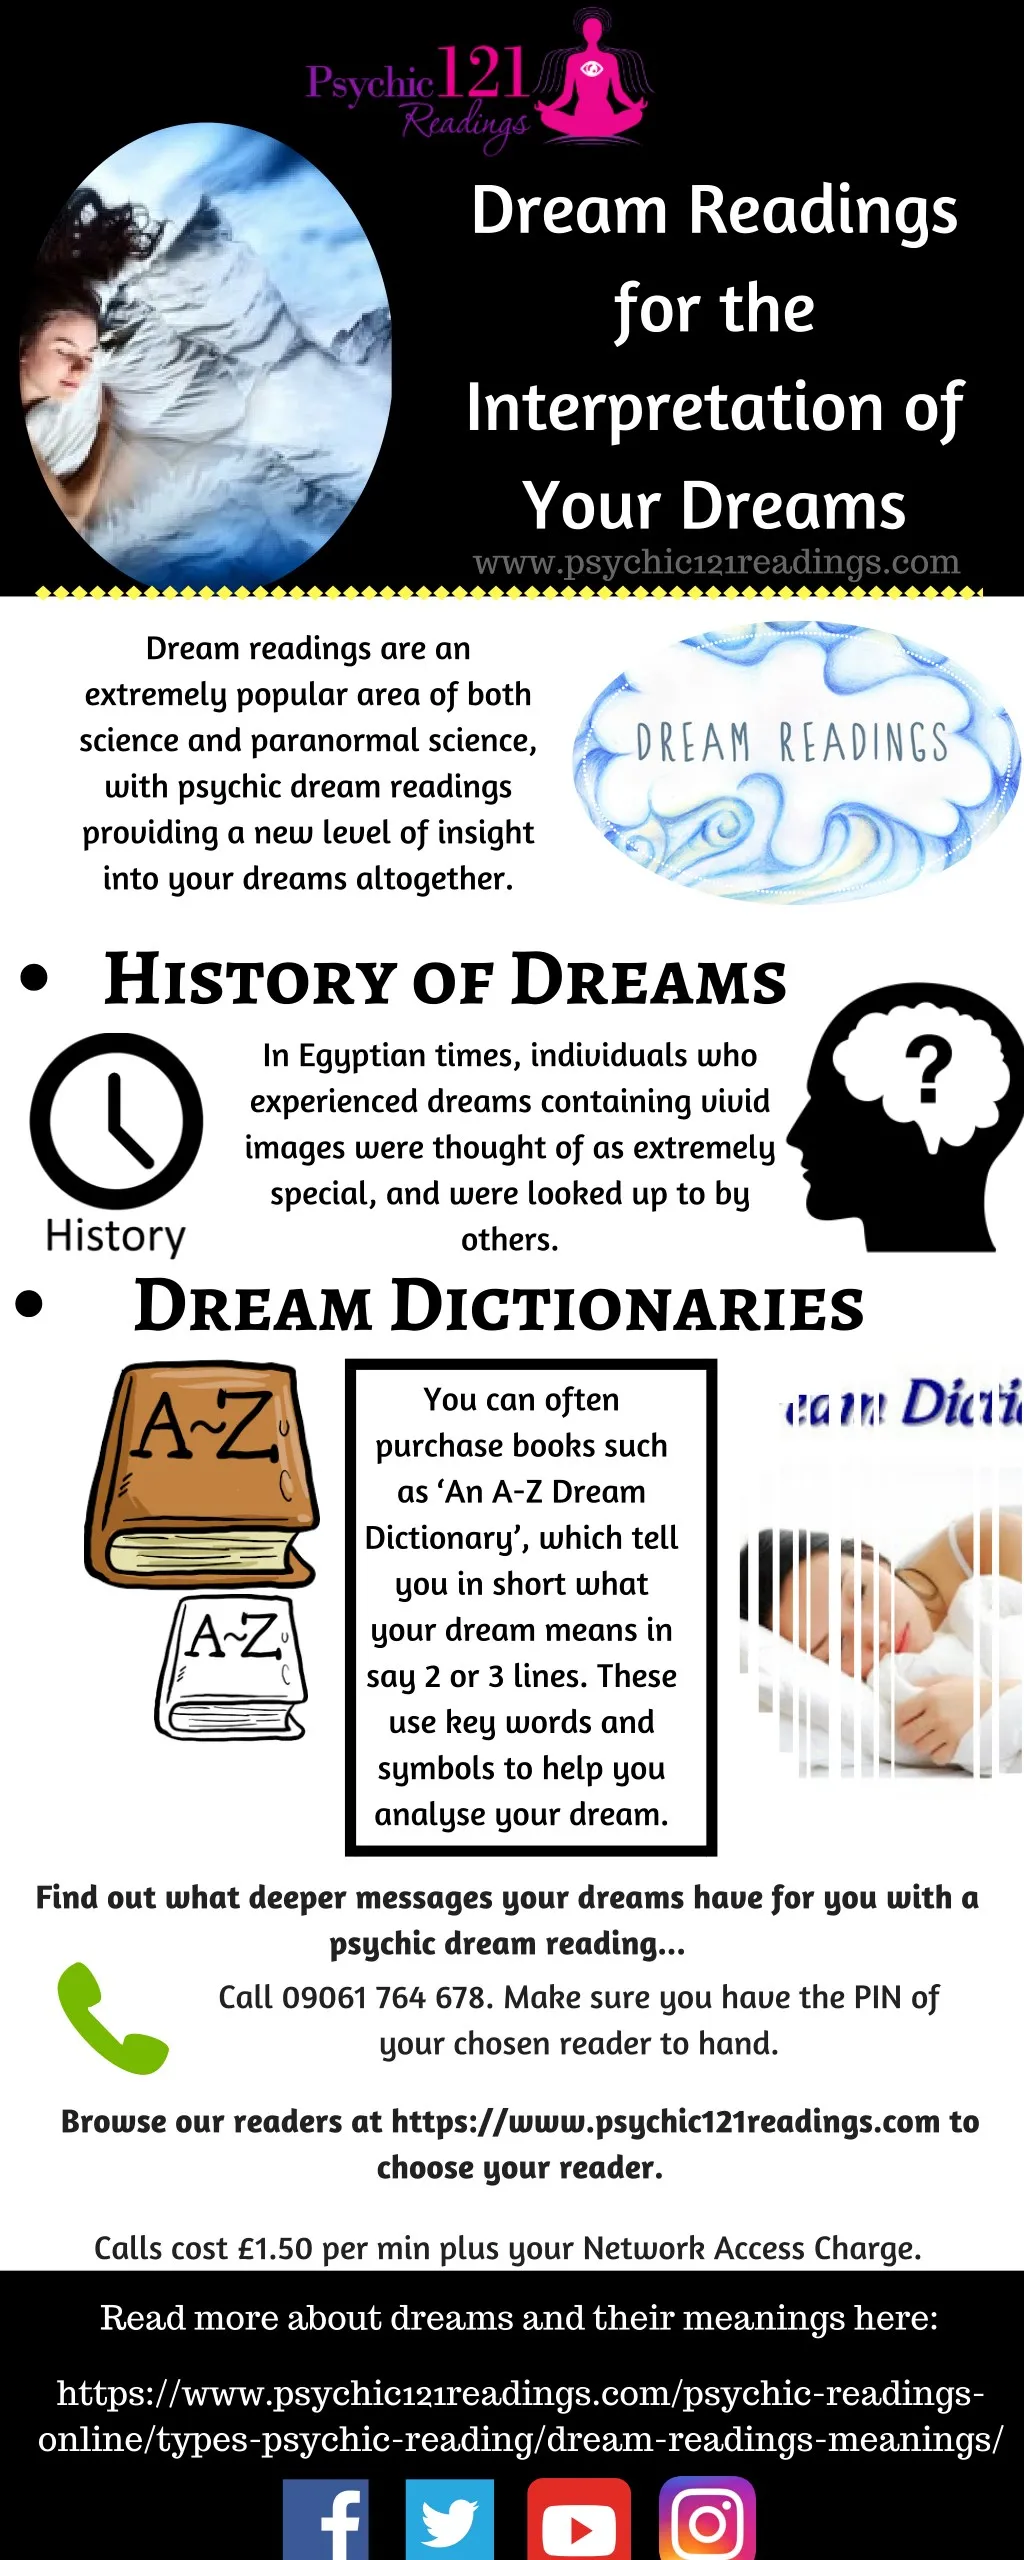 dream readings for the interpretation of your